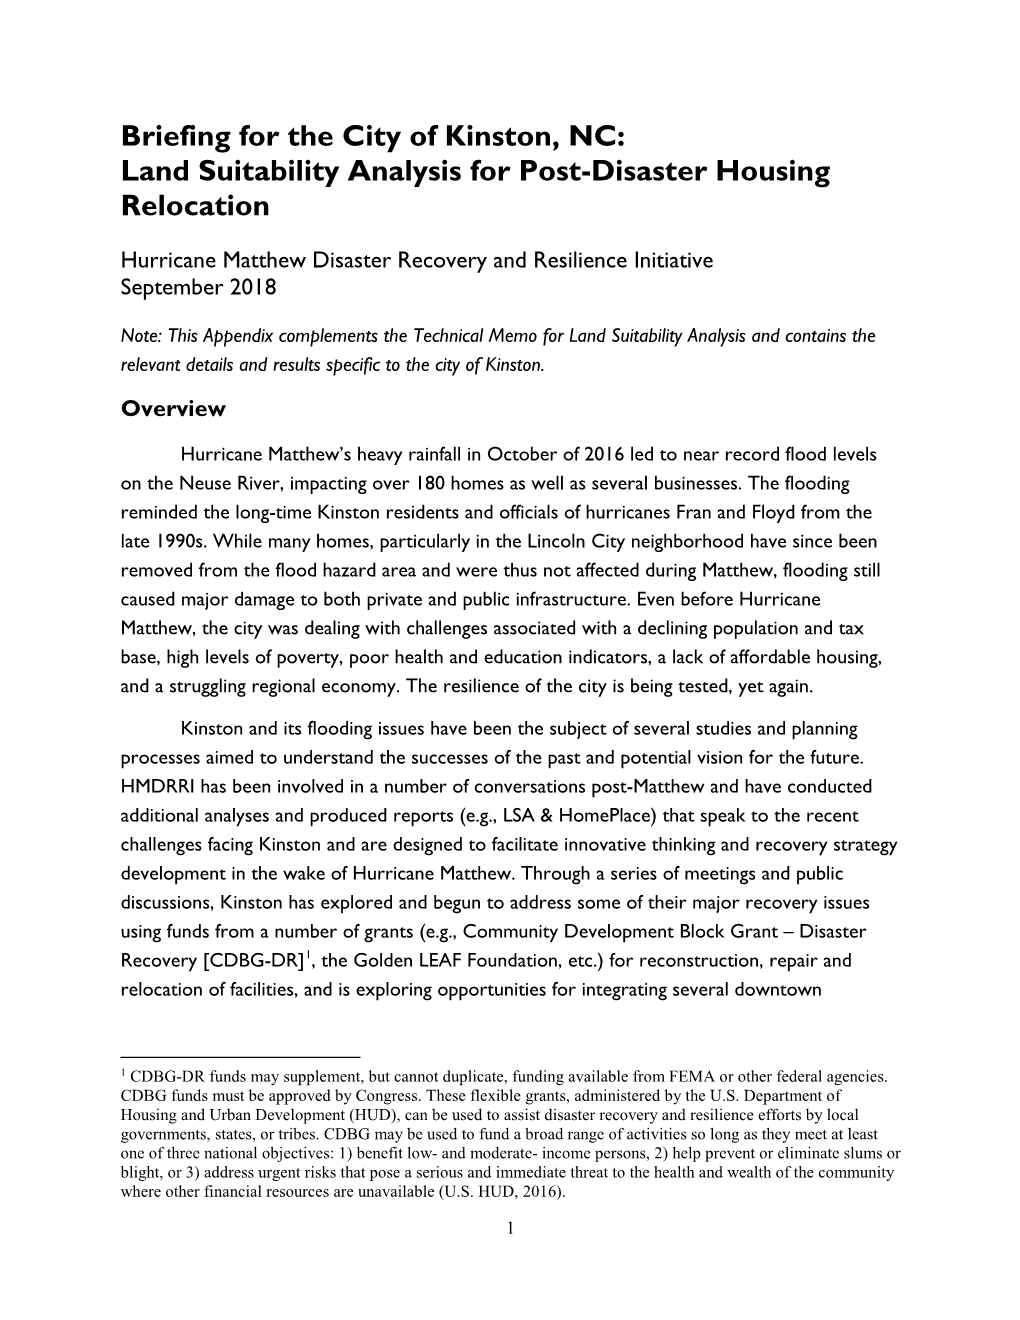 Briefing for the City of Kinston, NC: Land Suitability Analysis for Post-Disaster Housing Relocation